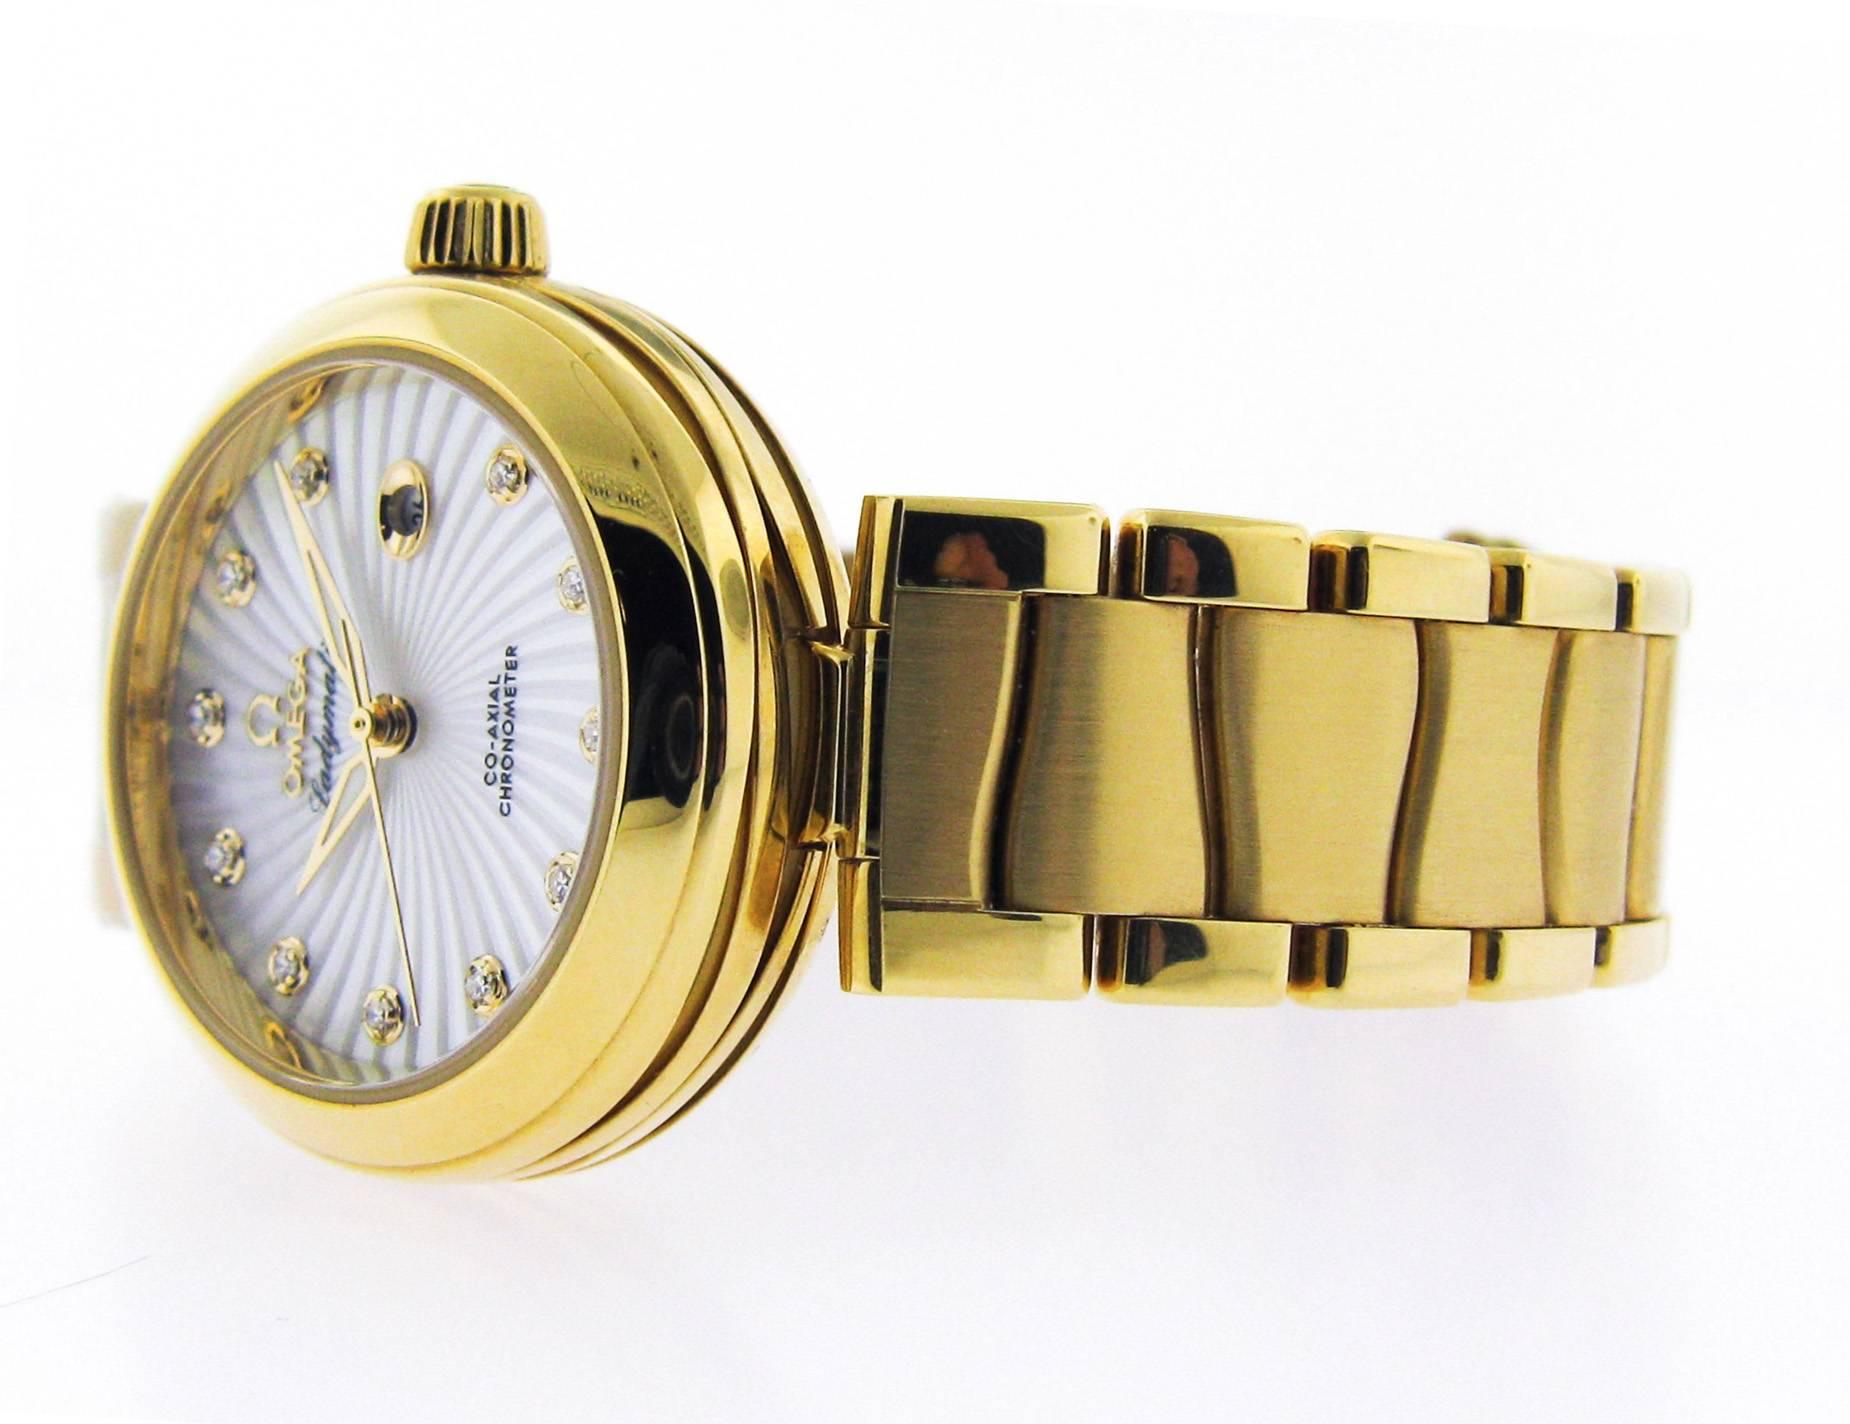 Omega Ladymatic wristwatch defined feminine grace and elegance.
The 34 mm case and bracelet in 18K yellow gold. Complementing the timeless case, is a captivating dial. The face of this timepiece features the Supernova pattern in white